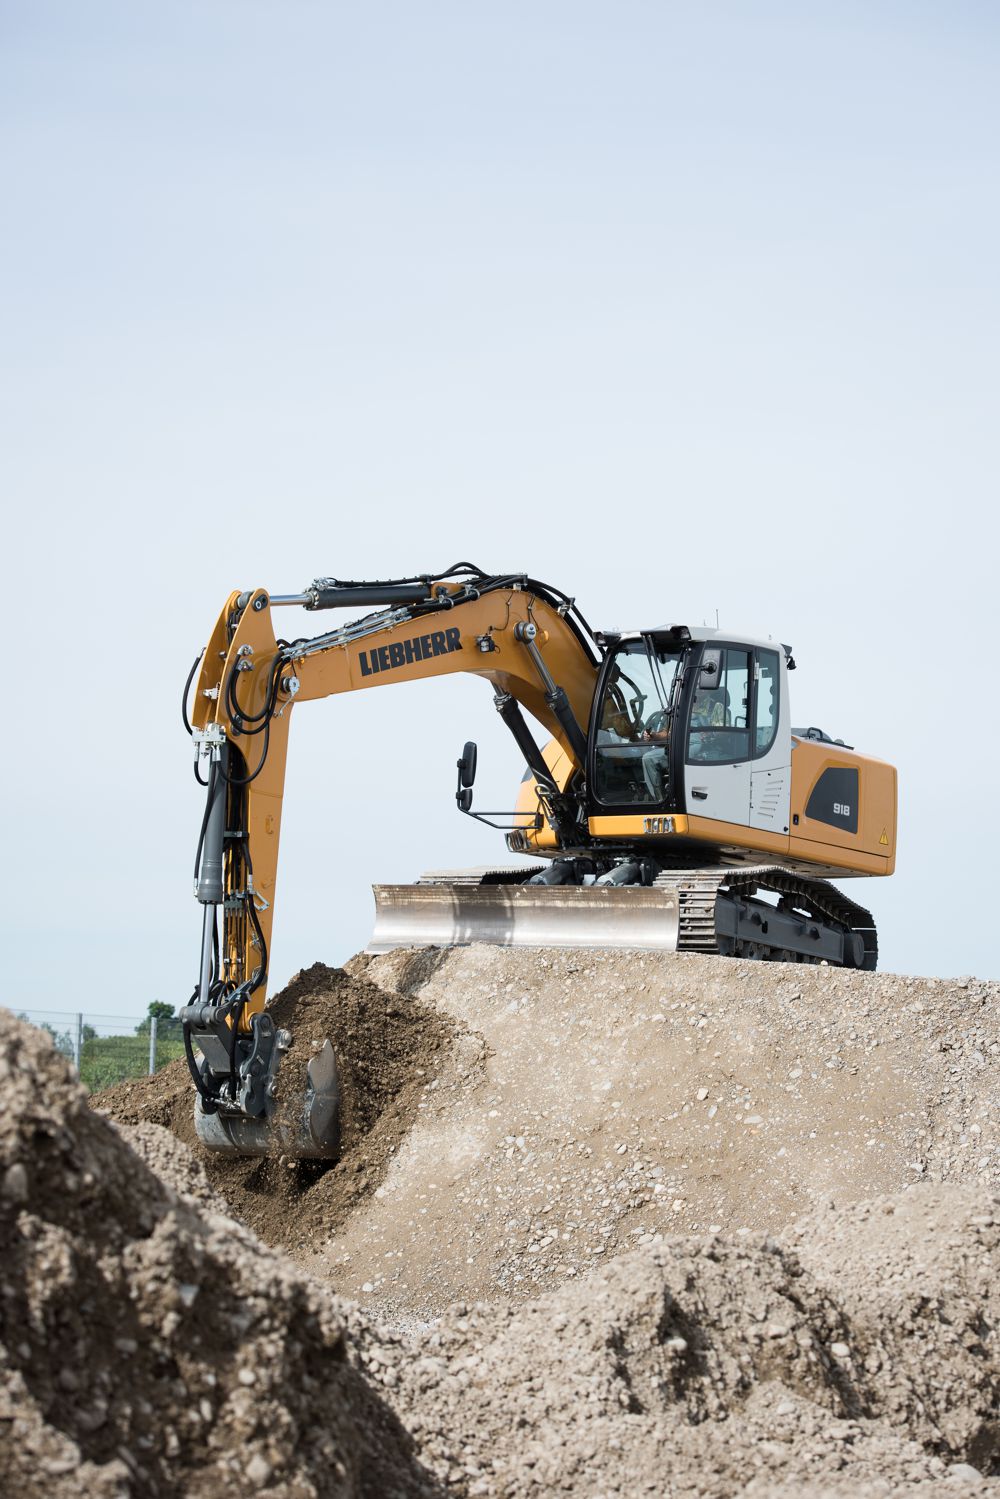 The Liebherr R 918 crawler excavator complies with the Stage IV exhaust emissions standard and achieves 120 kW / 123 hp.